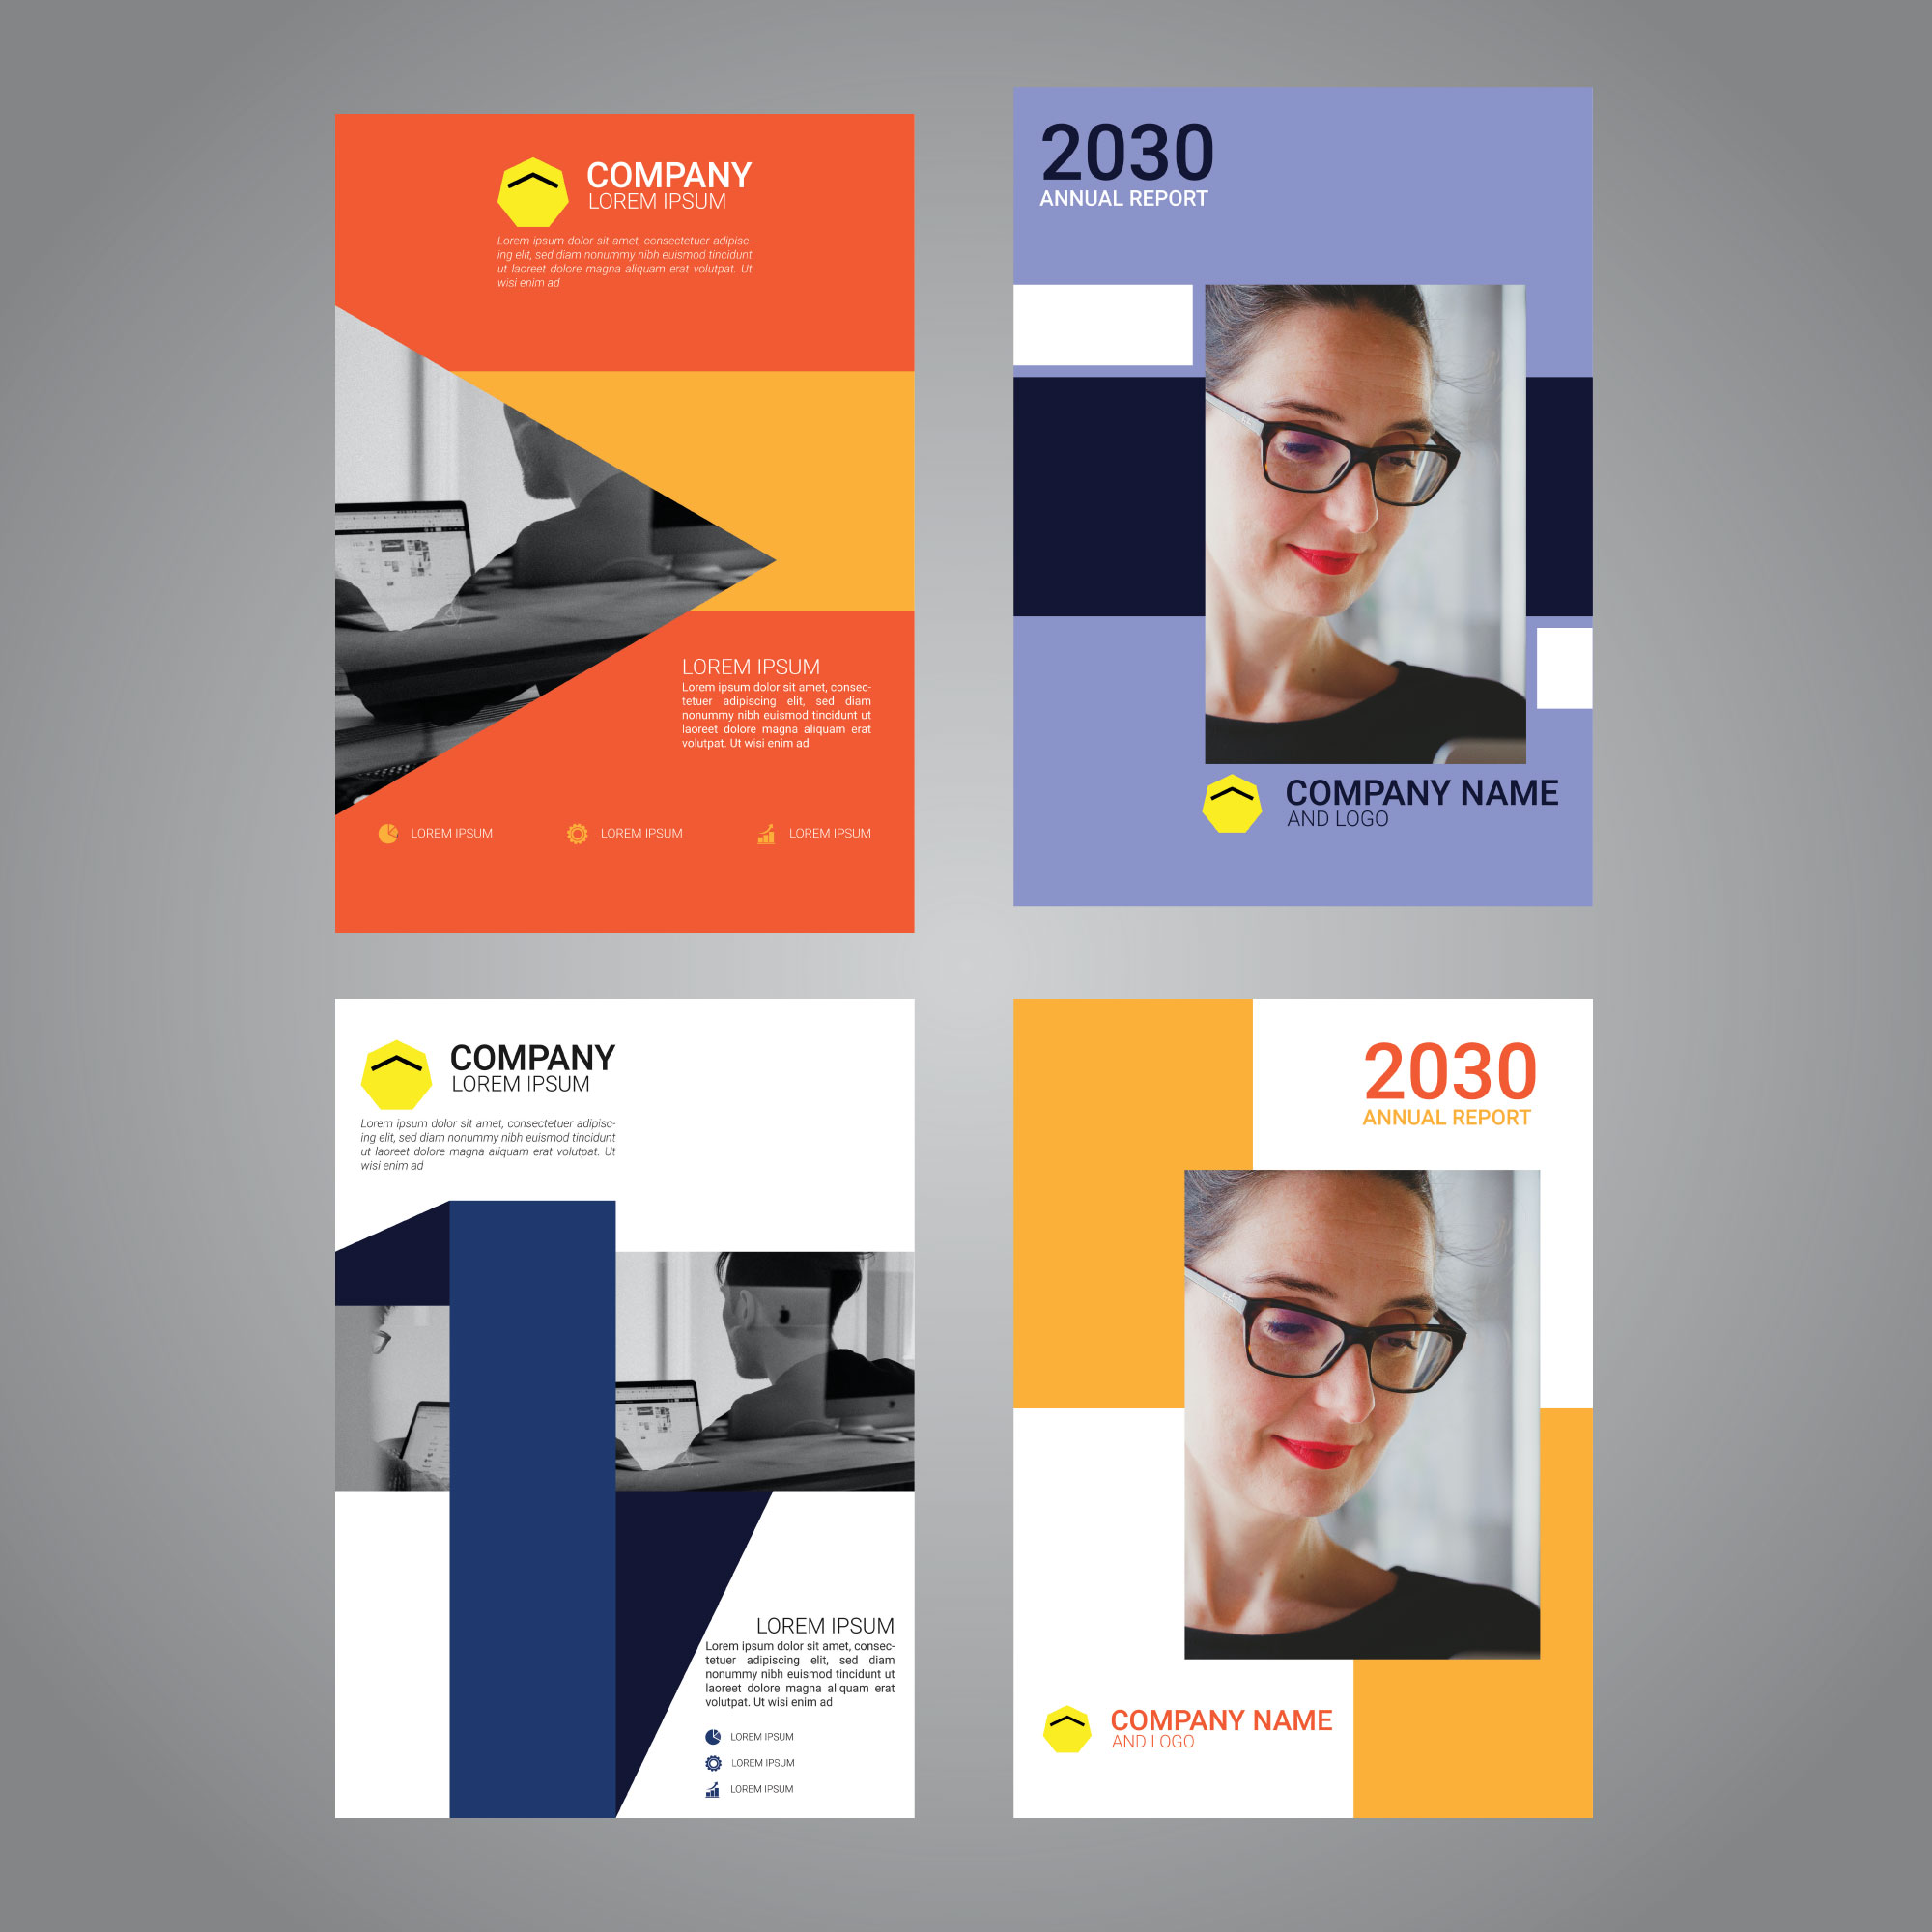 Cover design for an annual report, business magazine vector templates cover image.